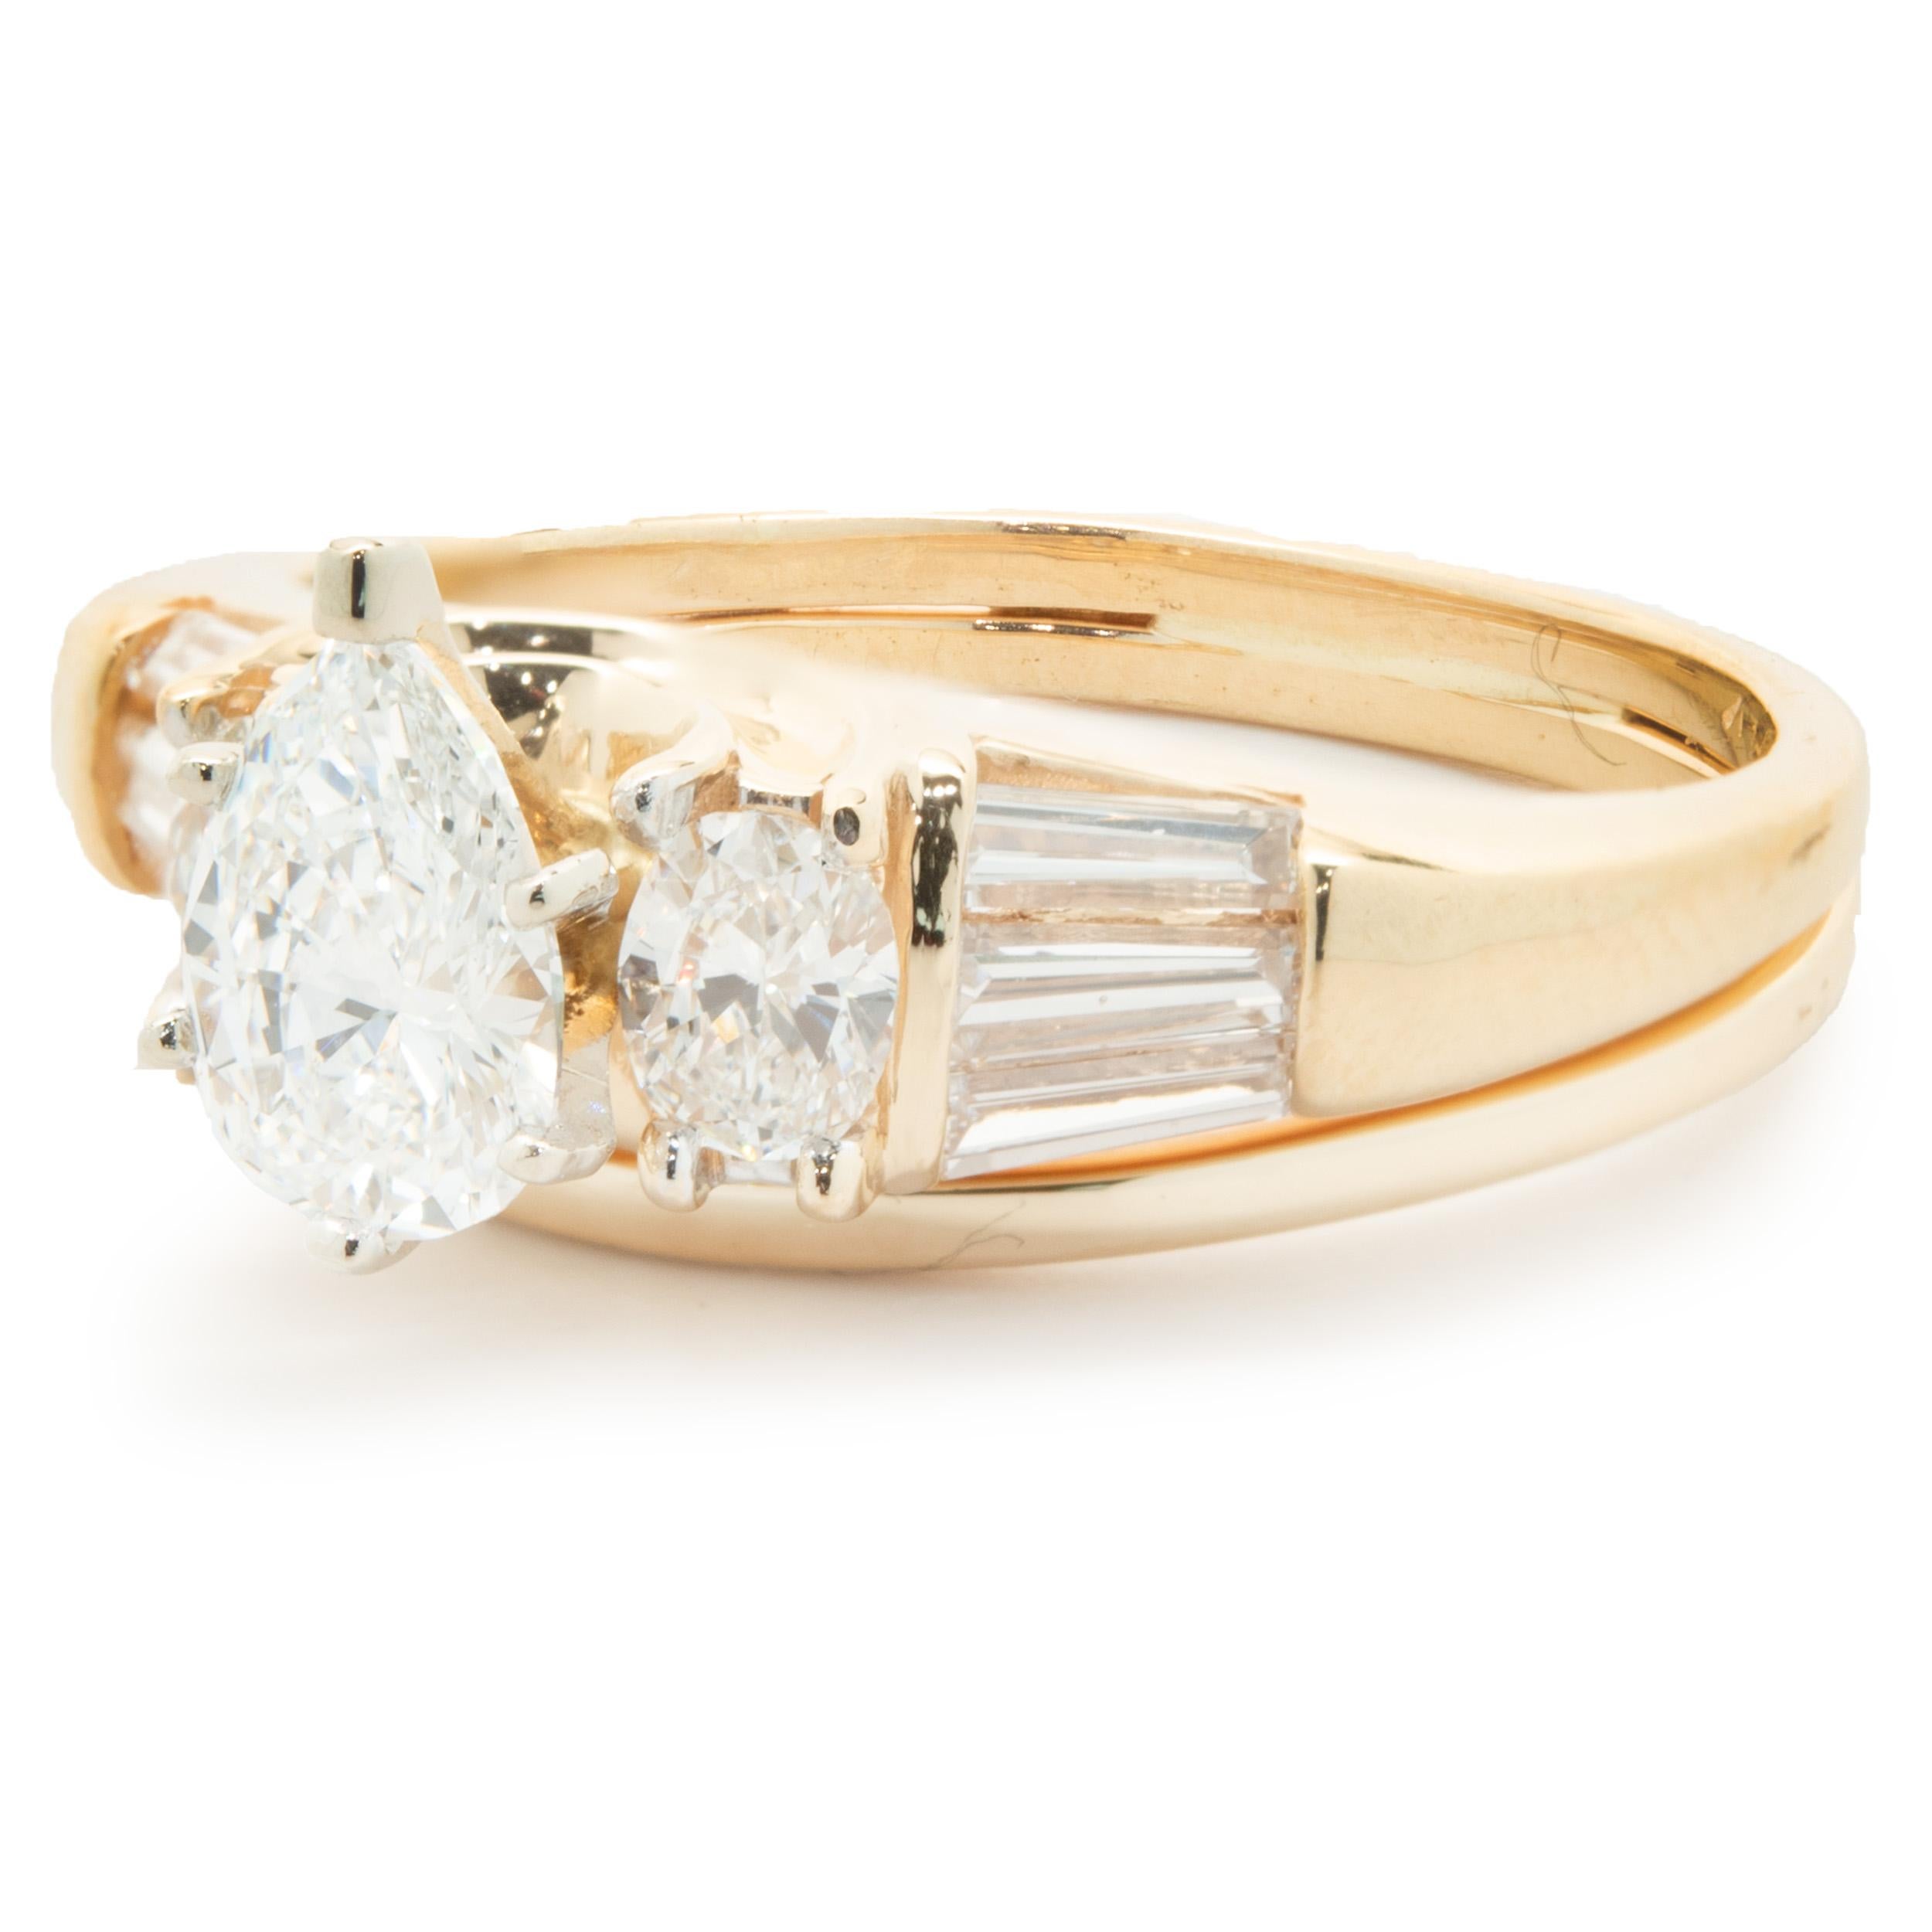 Designer: Custom
Material: 14K yellow gold
Diamond: 1 pear cut = 0.60ctw
Color: F
Clarity: VVS2
Diamond: 8 oval & baguette cut = 0.60cttw
Color: G
Clarity: VS
Dimensions: ring top measures 9mm wide
Ring Size: 7 (complimentary sizing